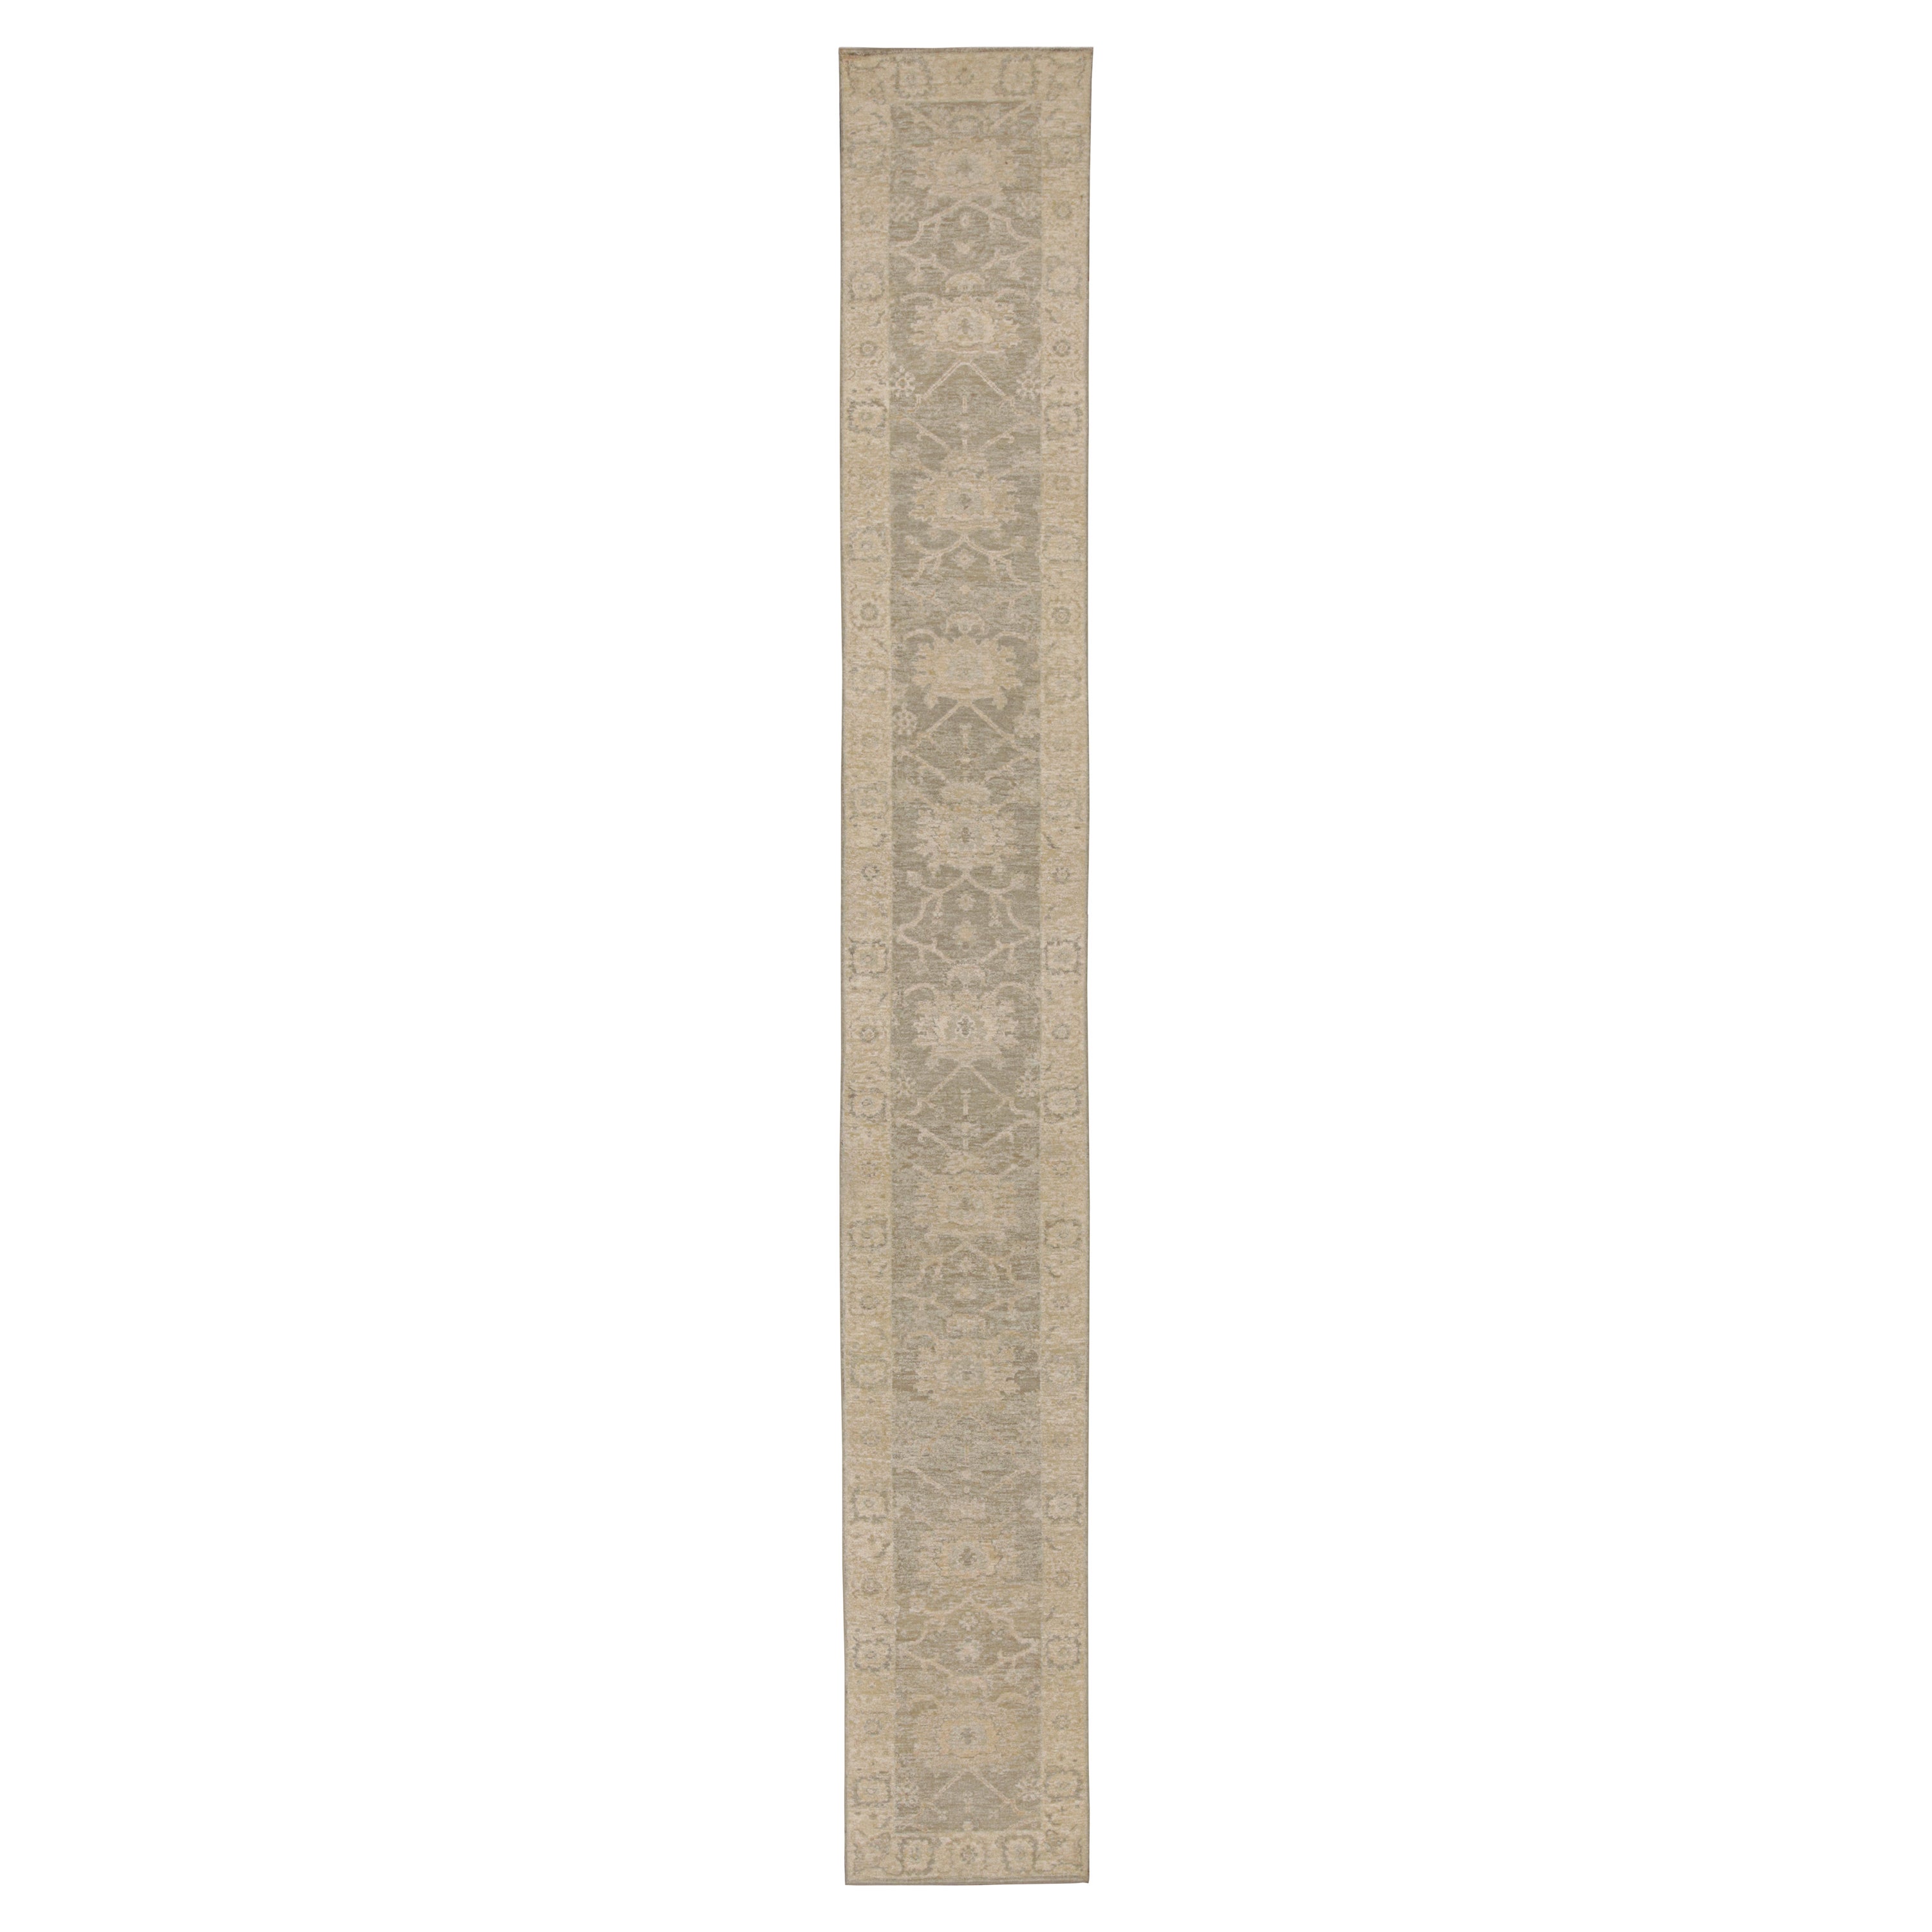 Rug & Kilim’s Oushak Style Runner Rug in Beige/Brown, With Floral Patterns